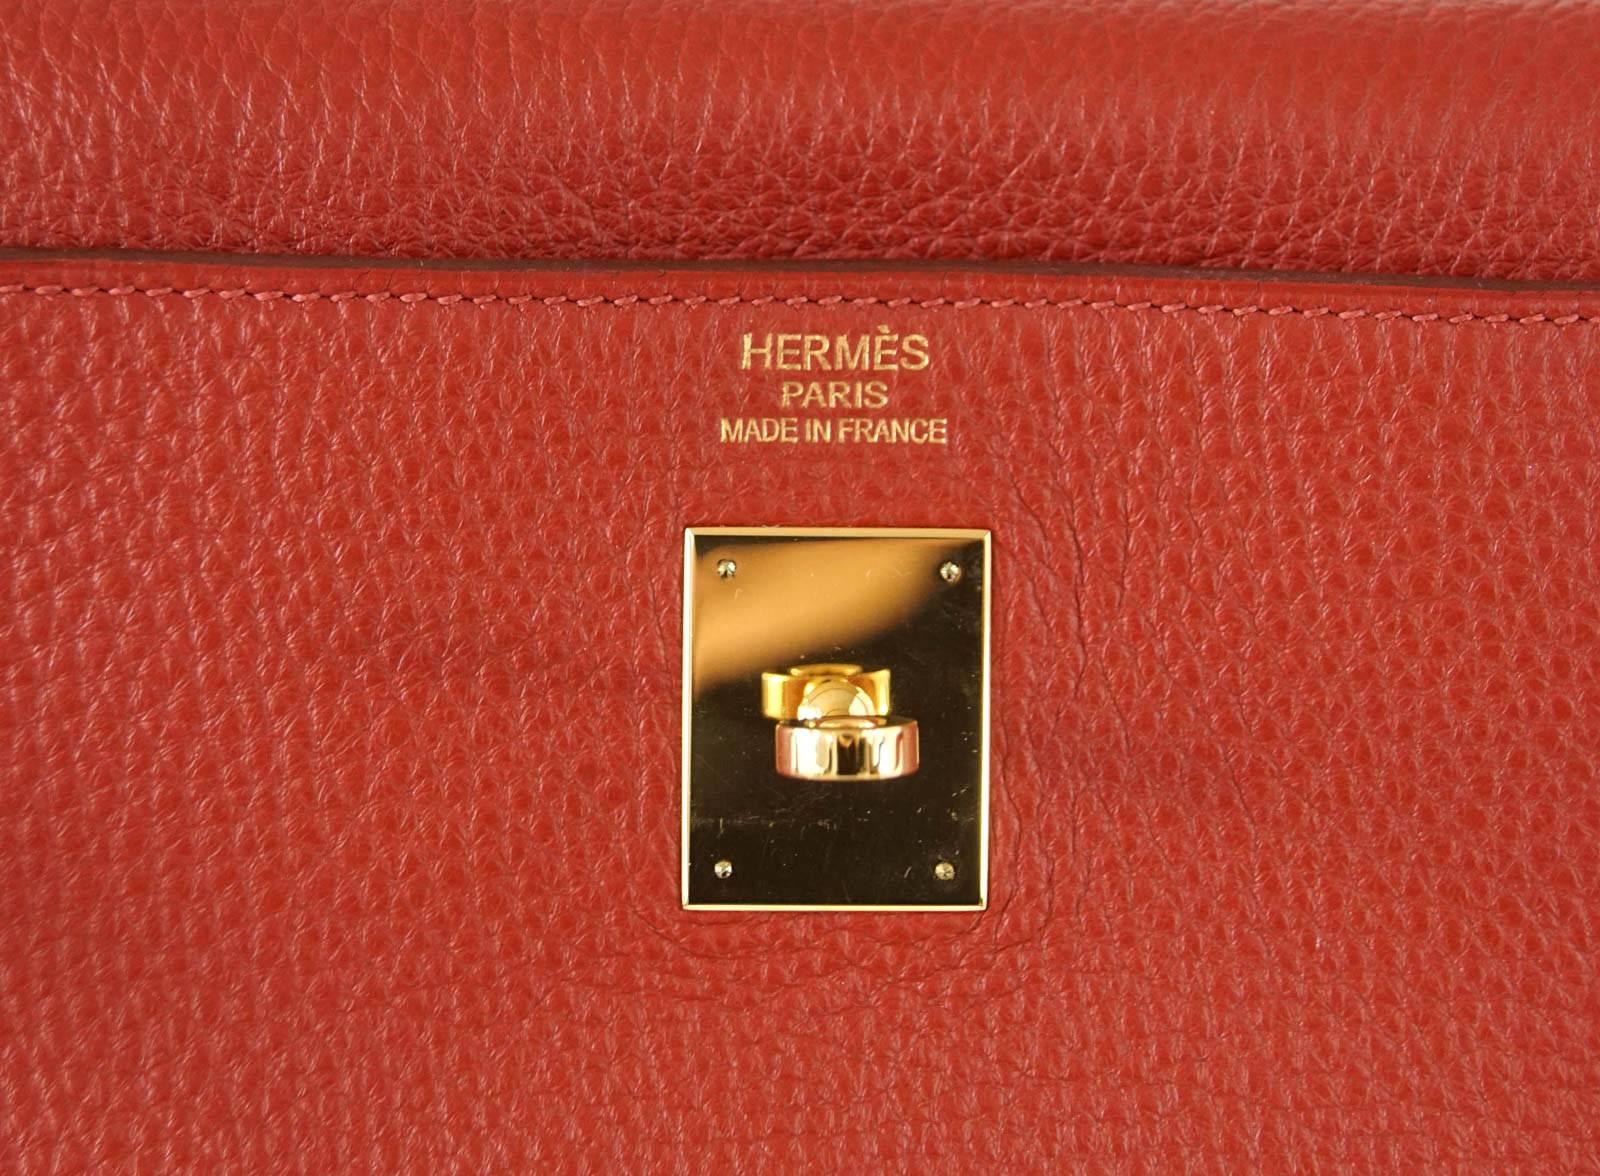 Guaranteed authentic rich Rouge Garrance Kelly 40 togo leather with Gold hardware.
Clean corners, handle, body and interior.
Comes with lock, keys, sleeper for bag, shoulder strap and Signature Hermes box.  
final sale

BAG MEASURES:
LENGTH  40 cm /